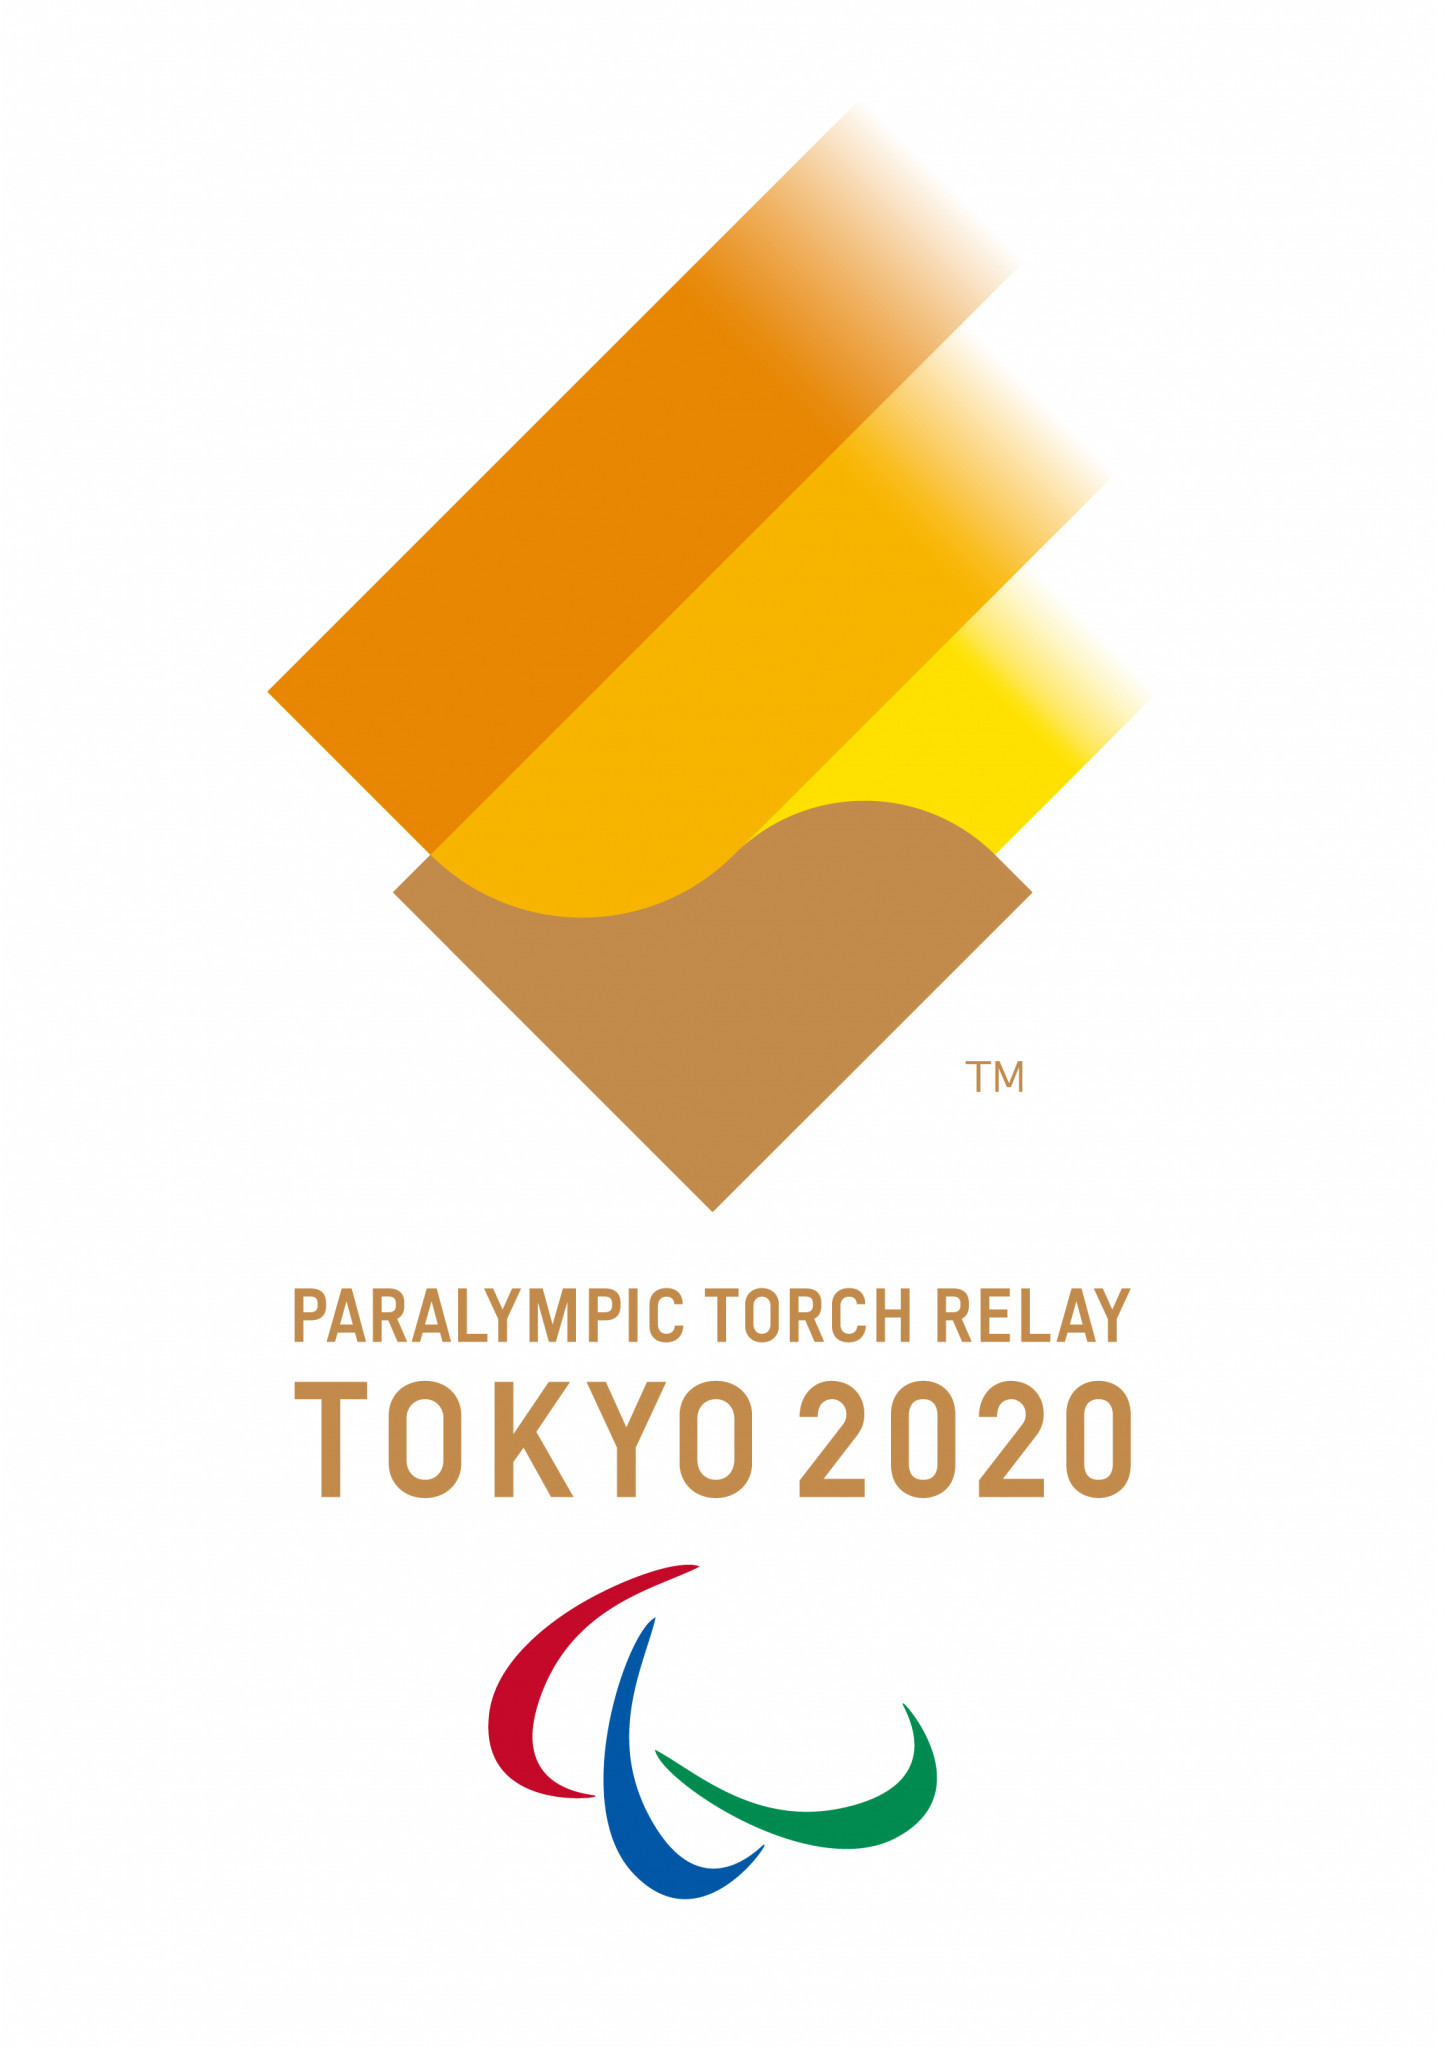 Tokyo 2020 reveals Paralympic Torch Relay details 